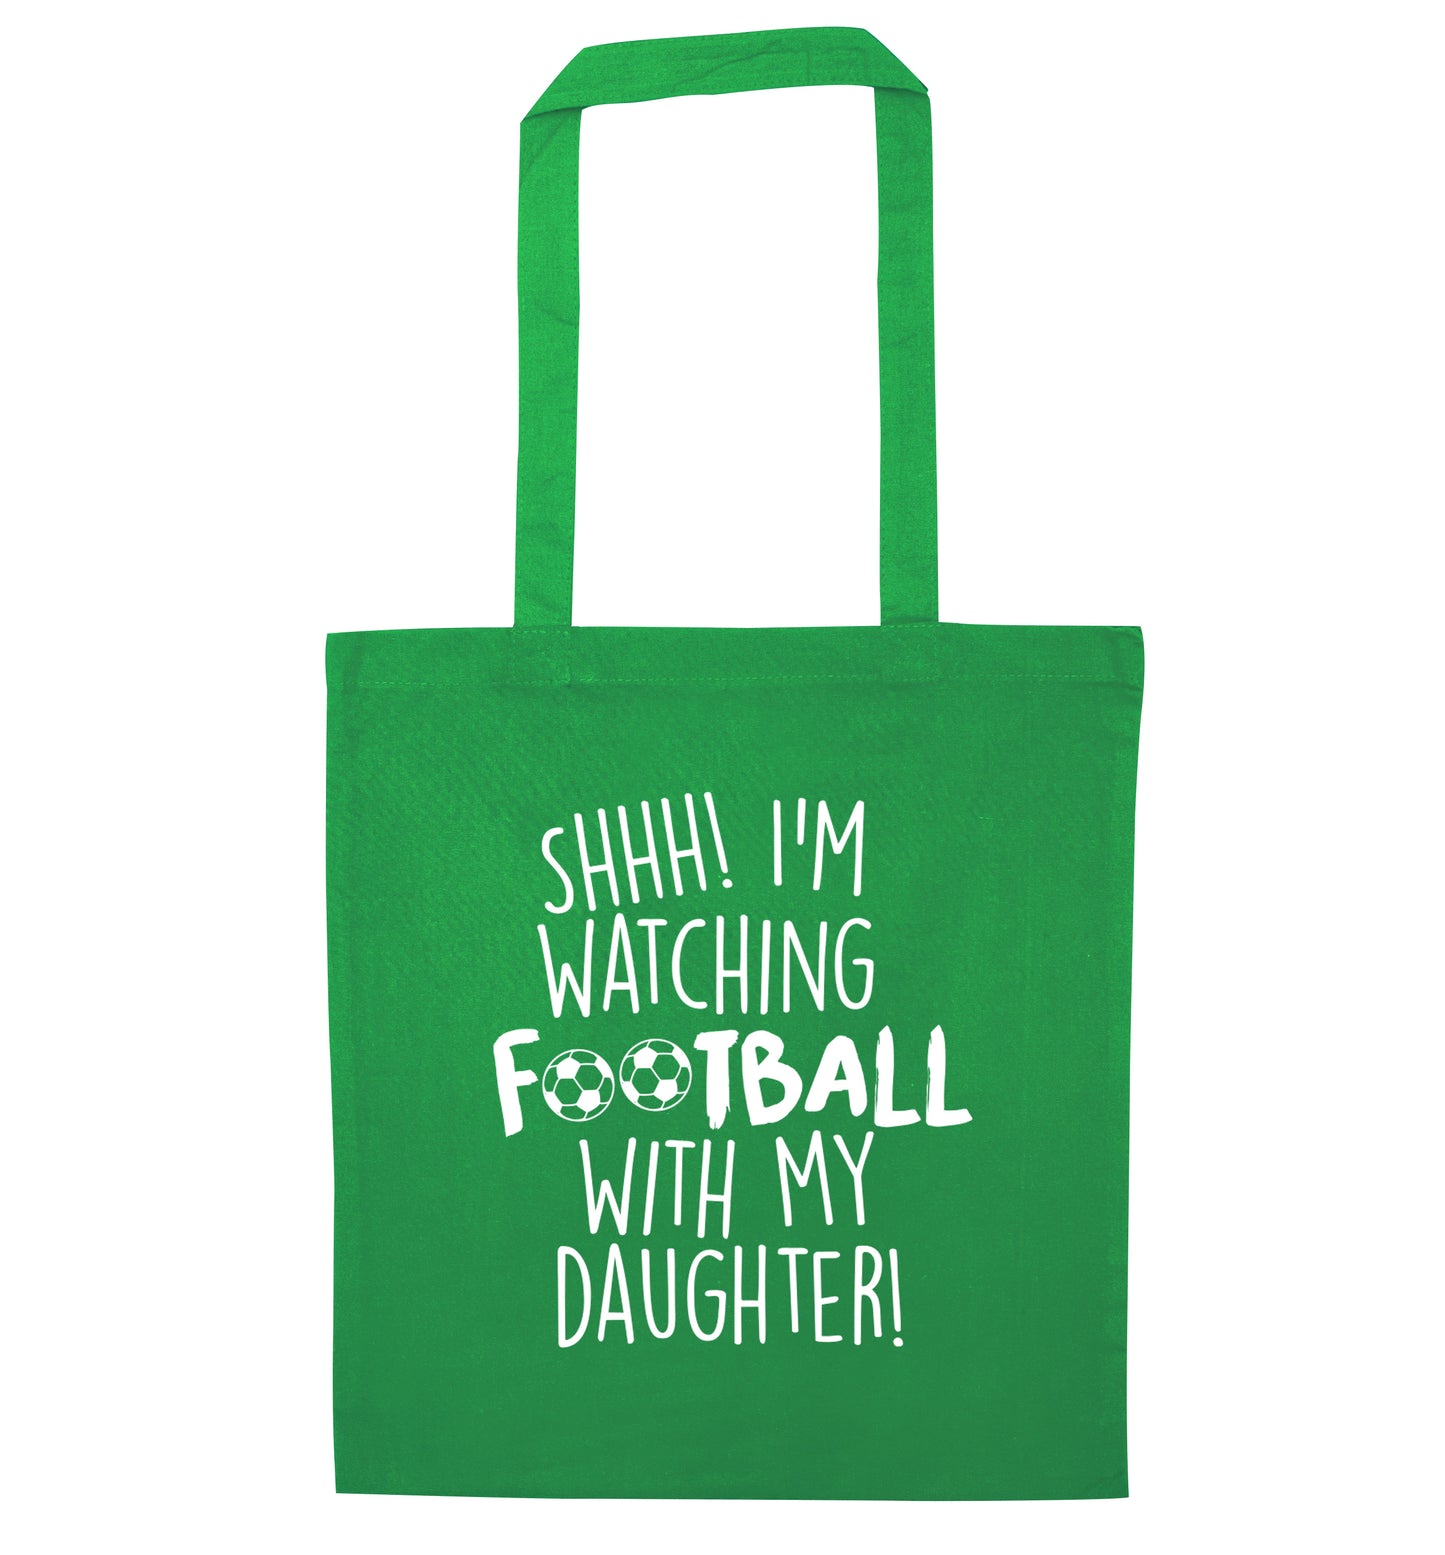 Shhh I'm watching football with my daughter green tote bag